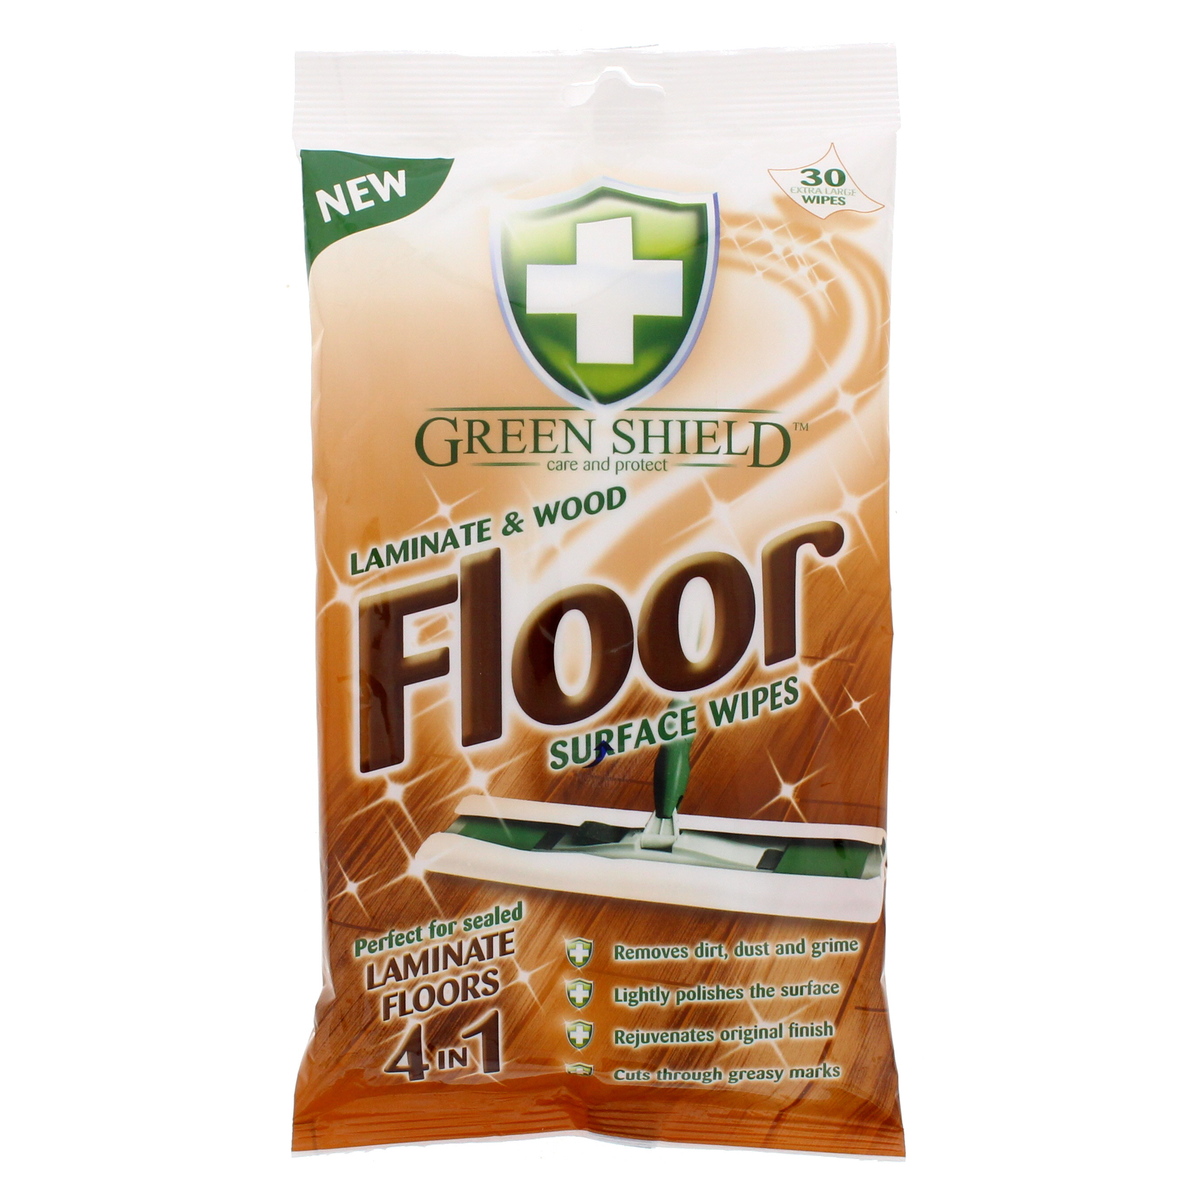 Green Shield Laminate And Wood Floor Surface Wipes 30pcs Buy